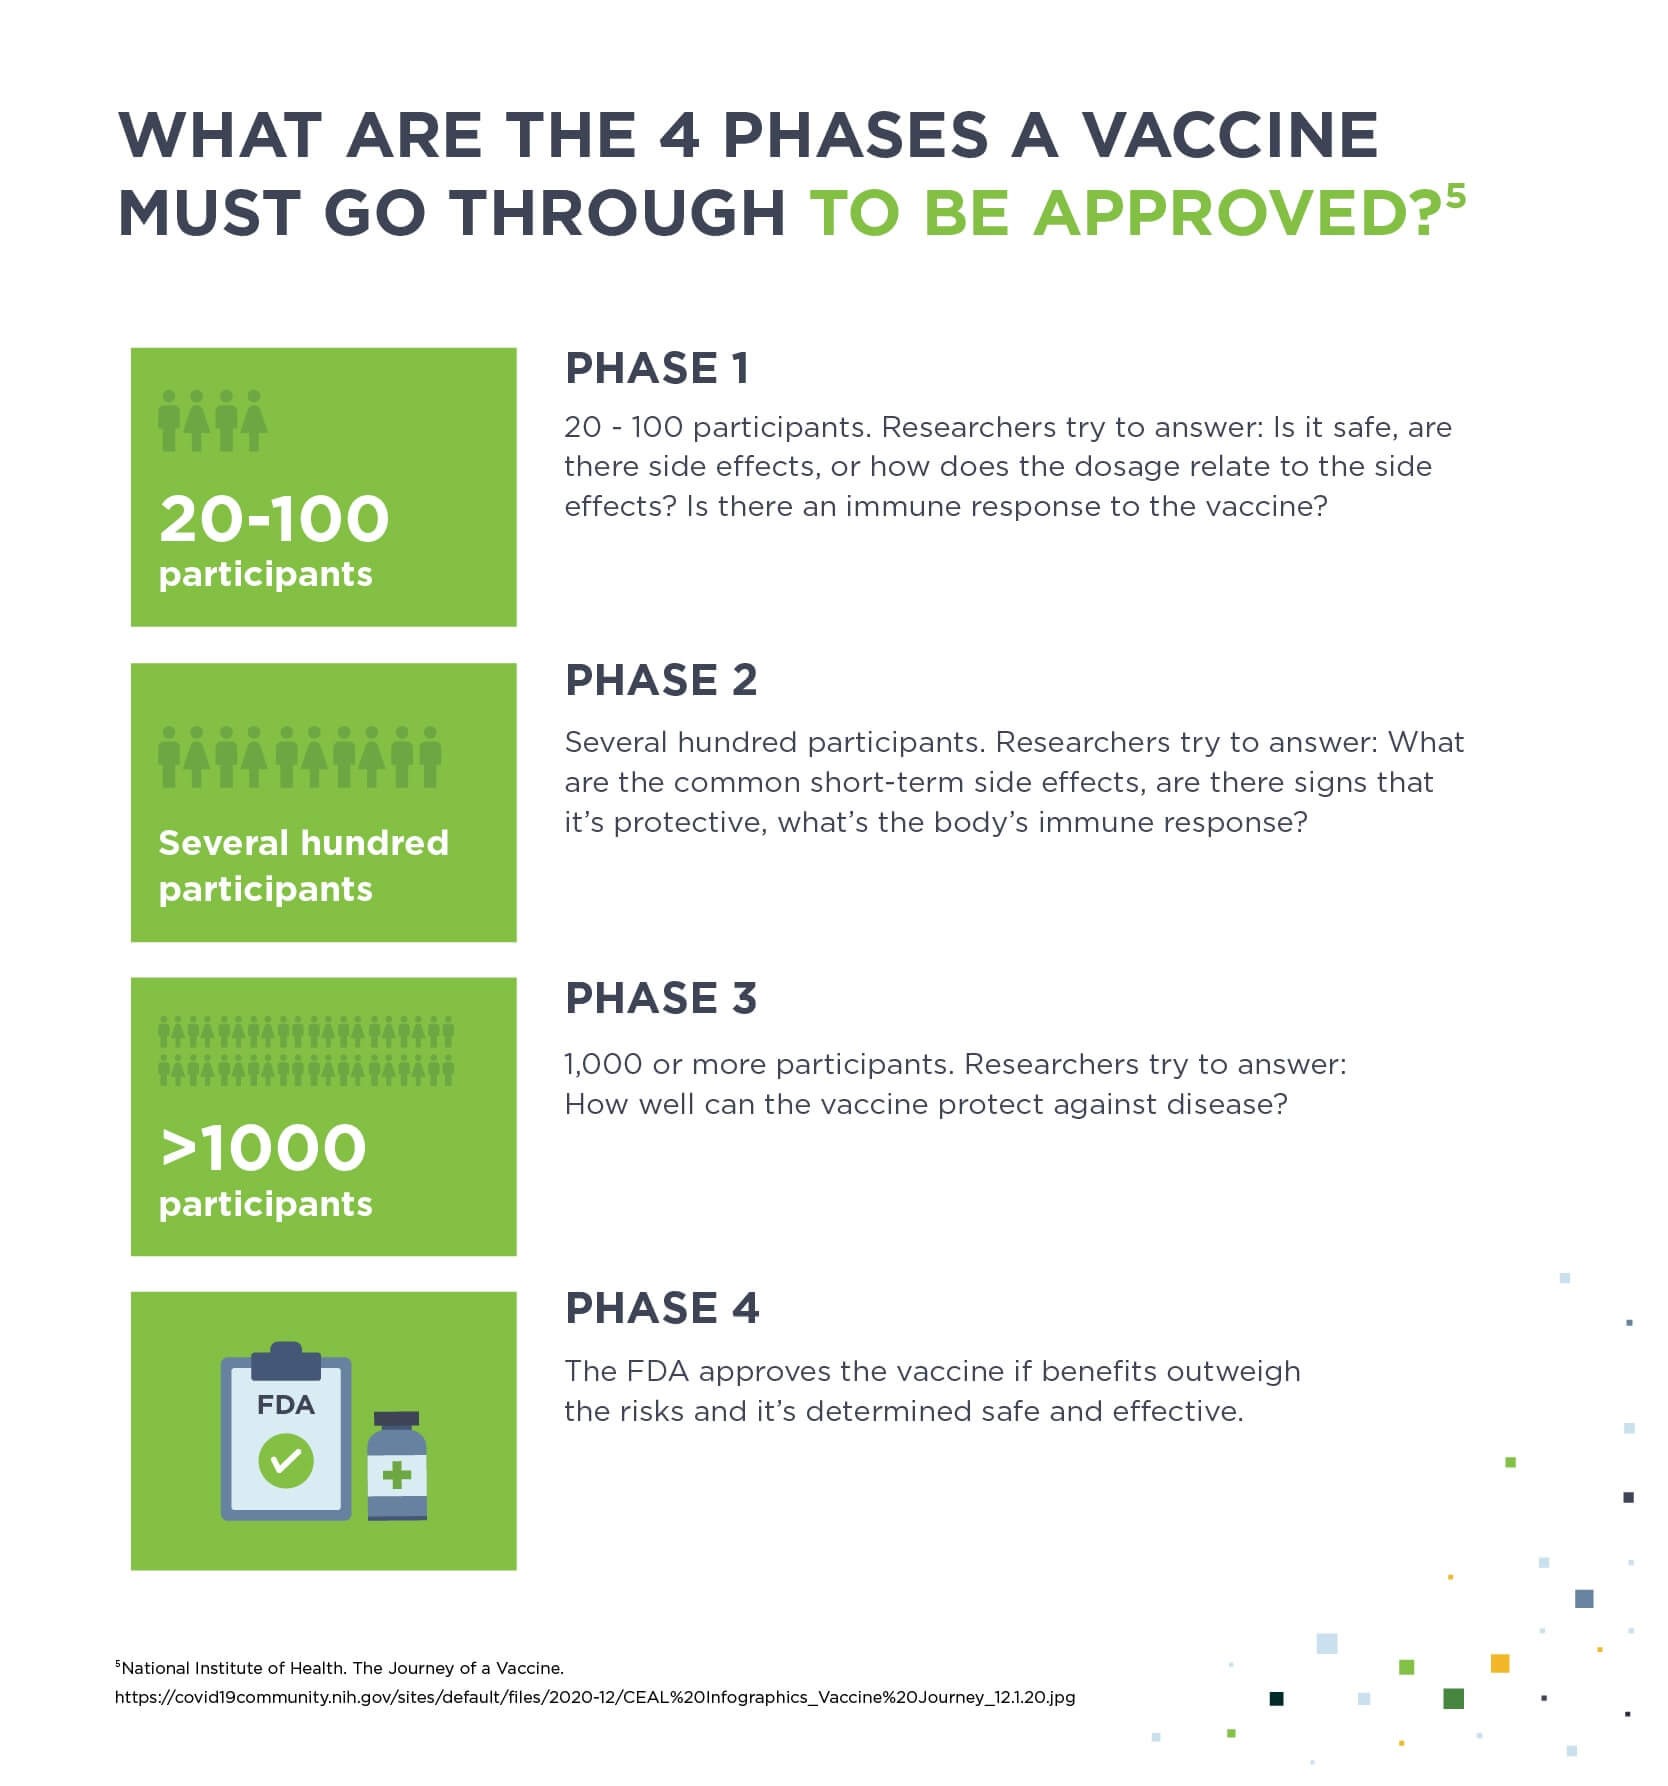 Illustration shows how the covid vaccine is made and the 4 phases it goes through for approval.